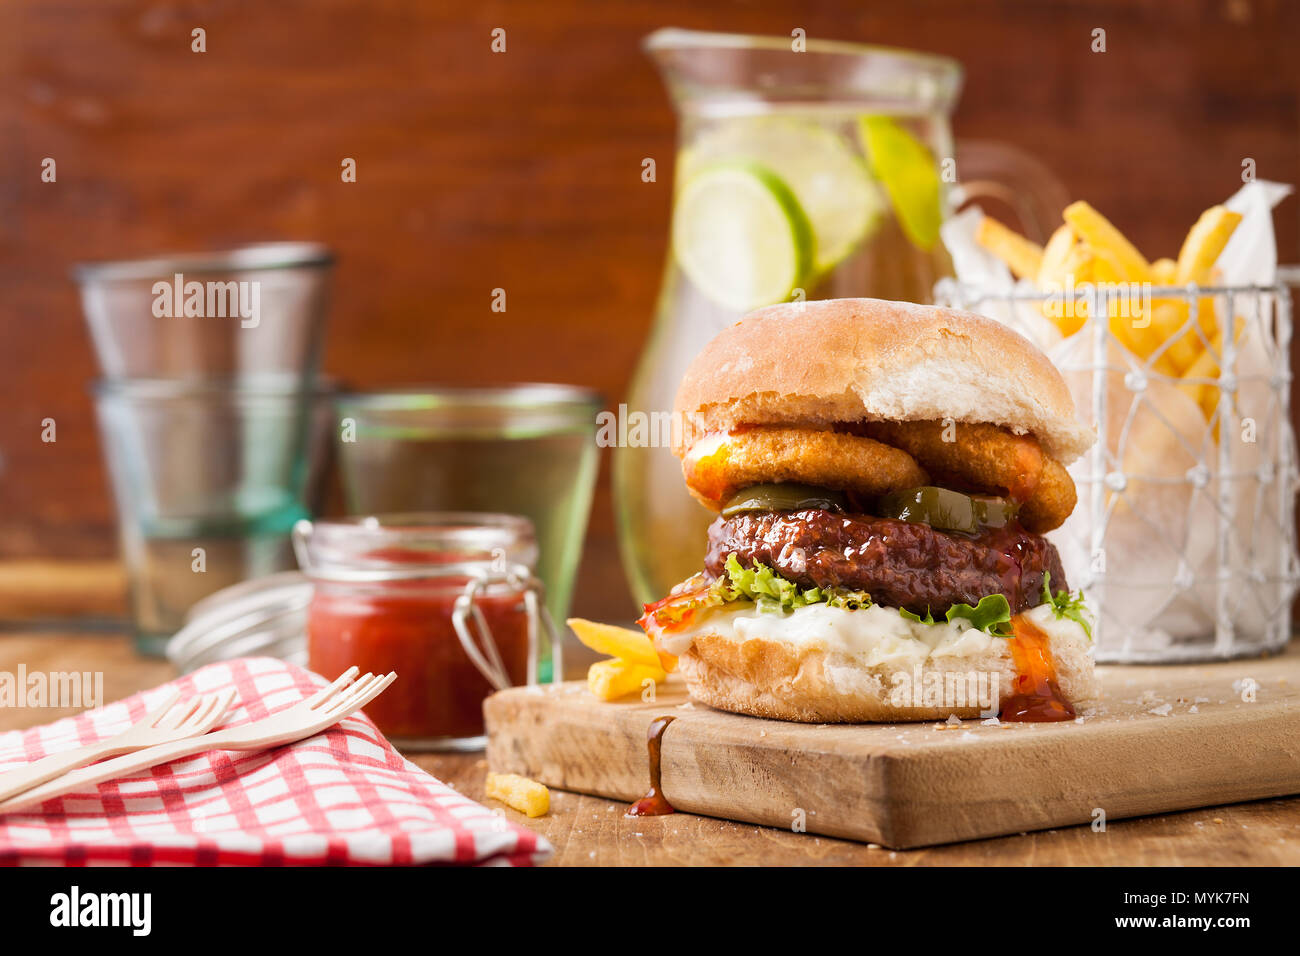 Burger in a bun with onion rings and fries on wooden background Stock Photo